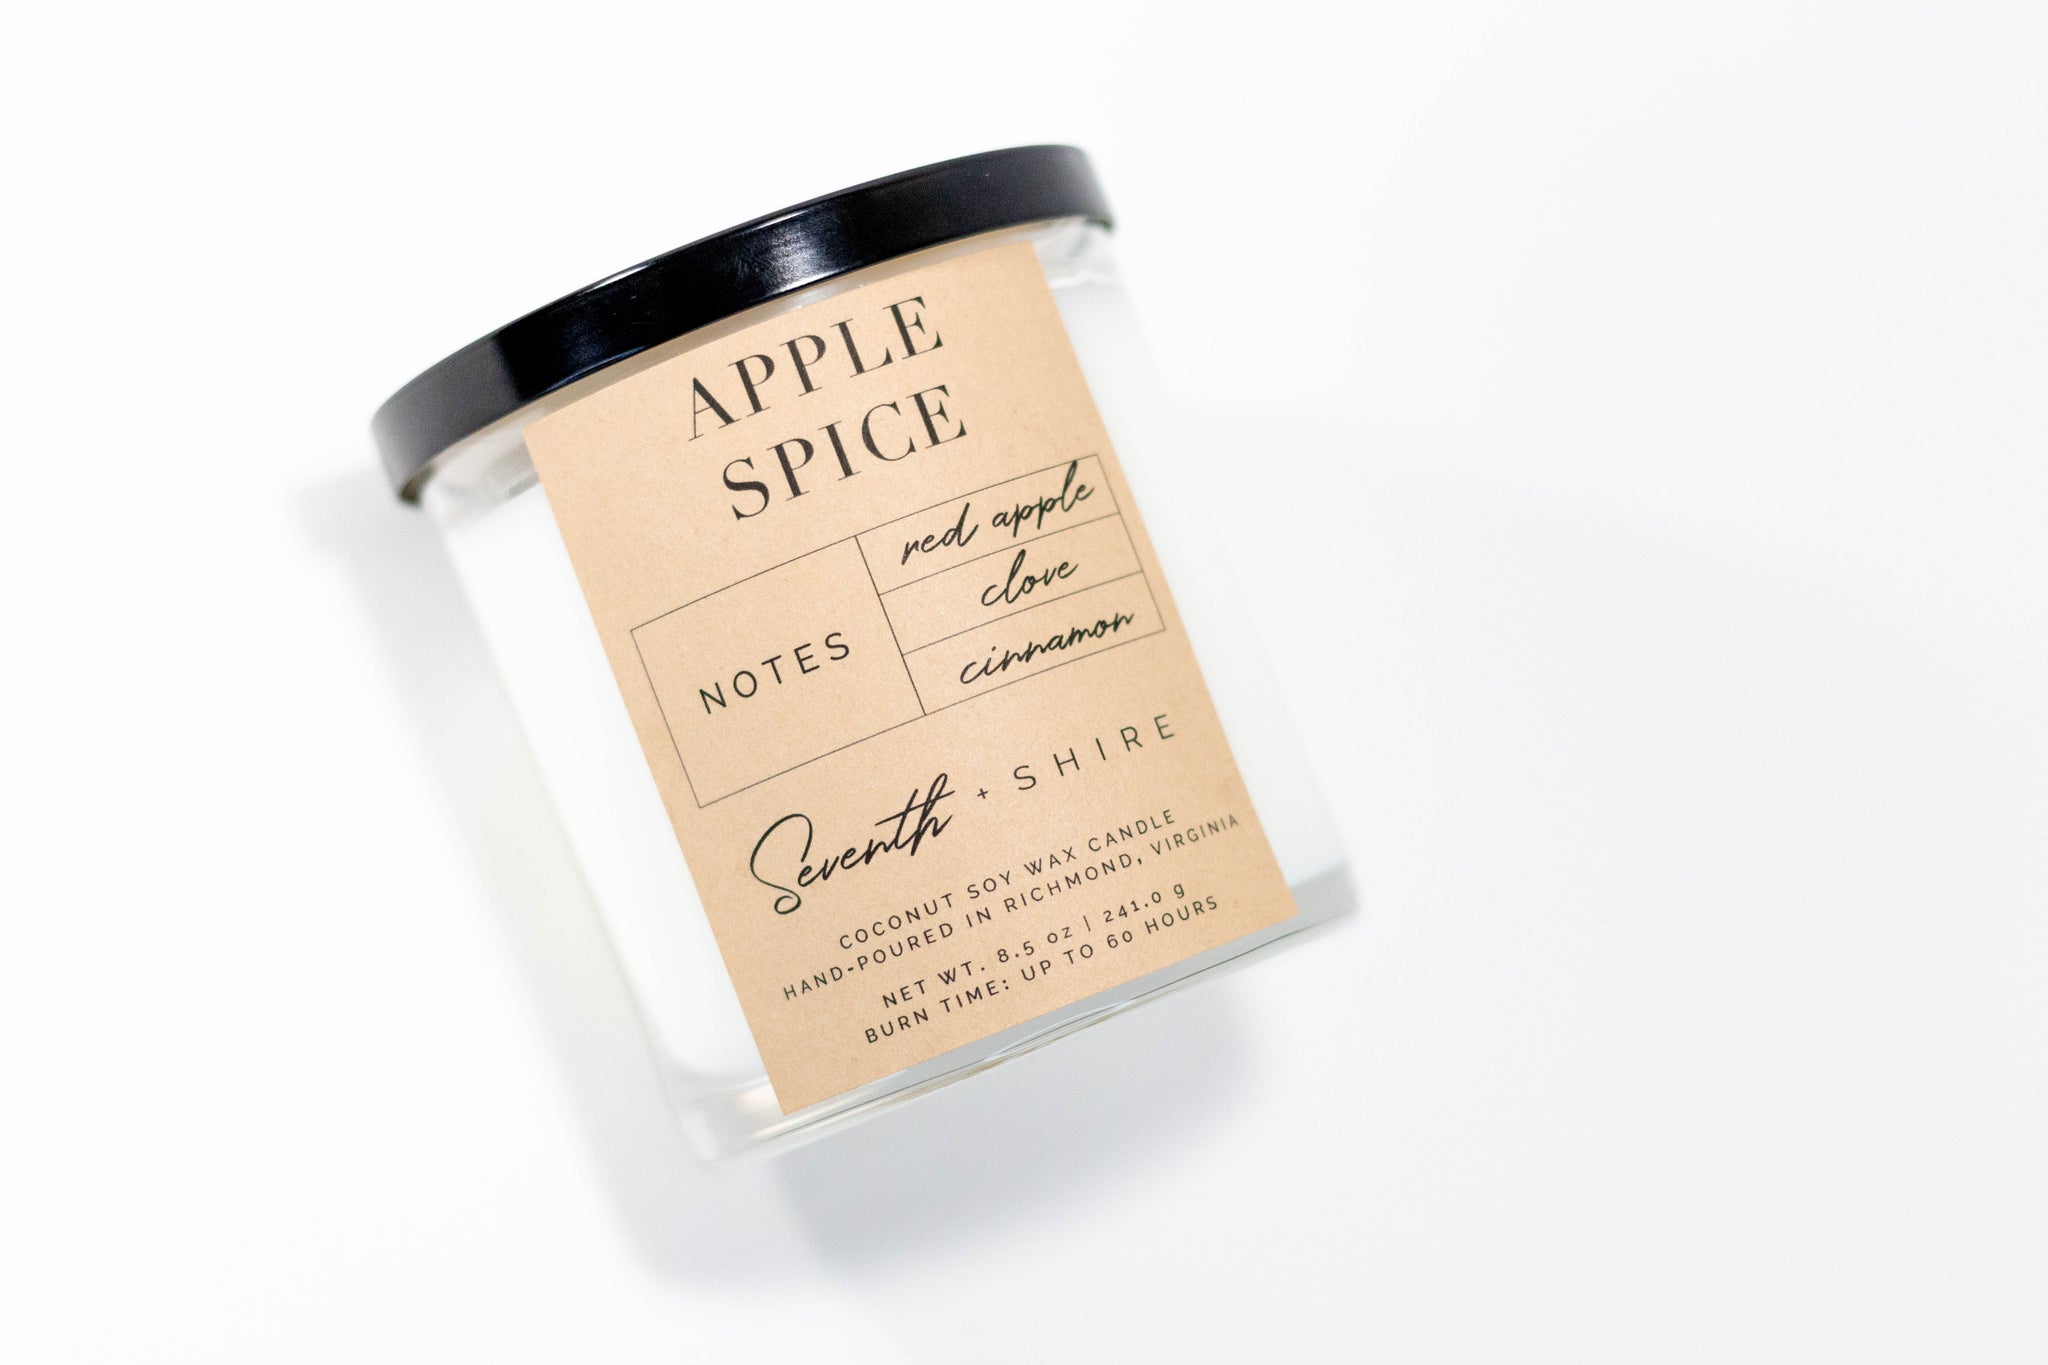 Apple Spice Tumbler Candle